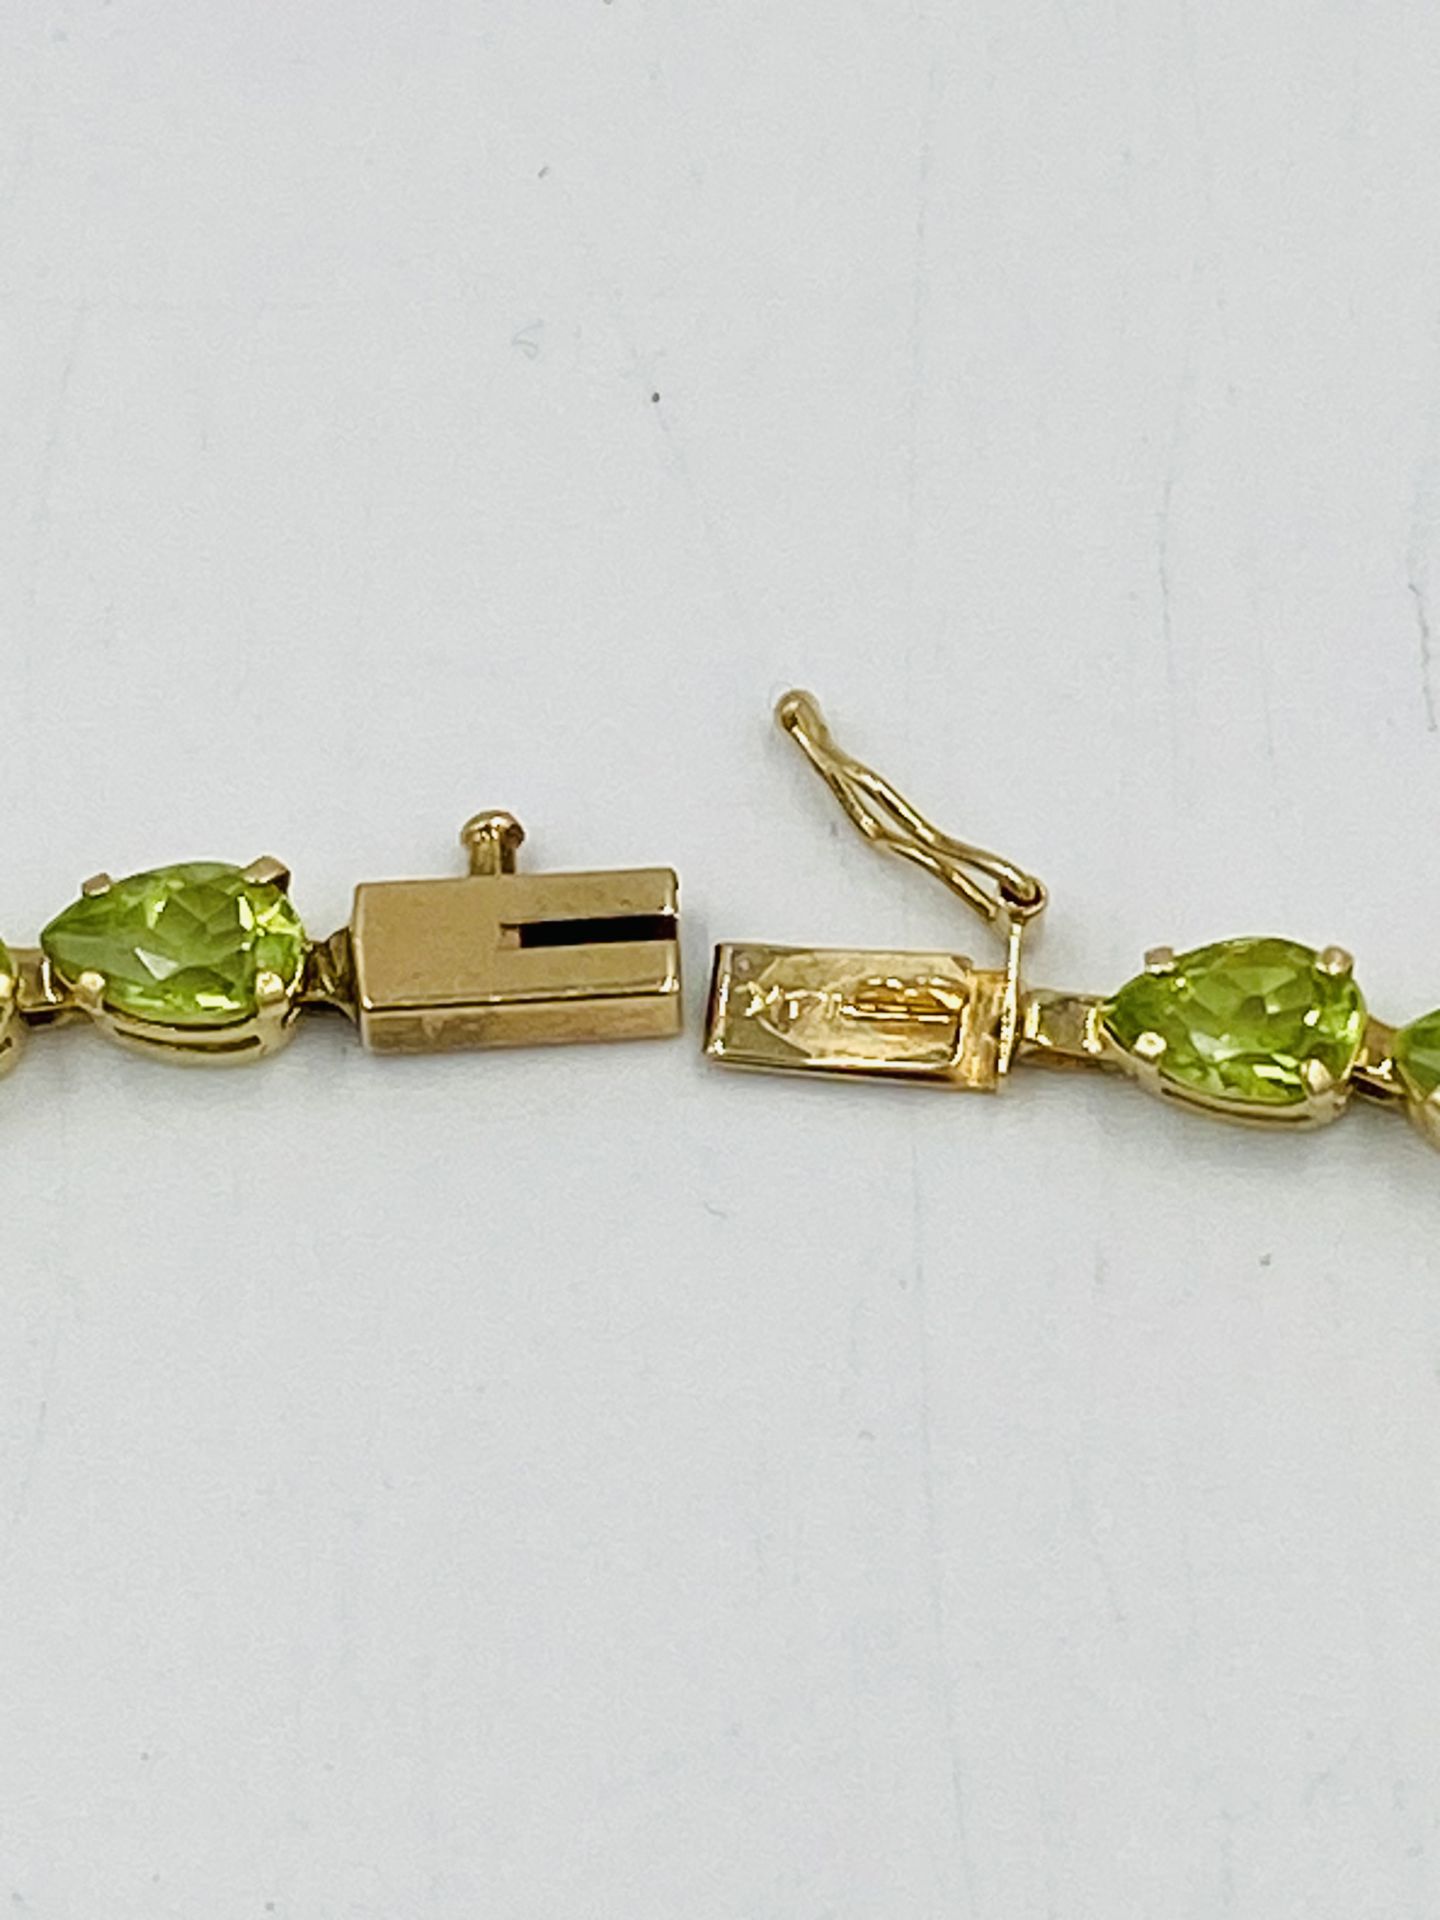 14ct gold bracelet set with green stones - Image 3 of 5